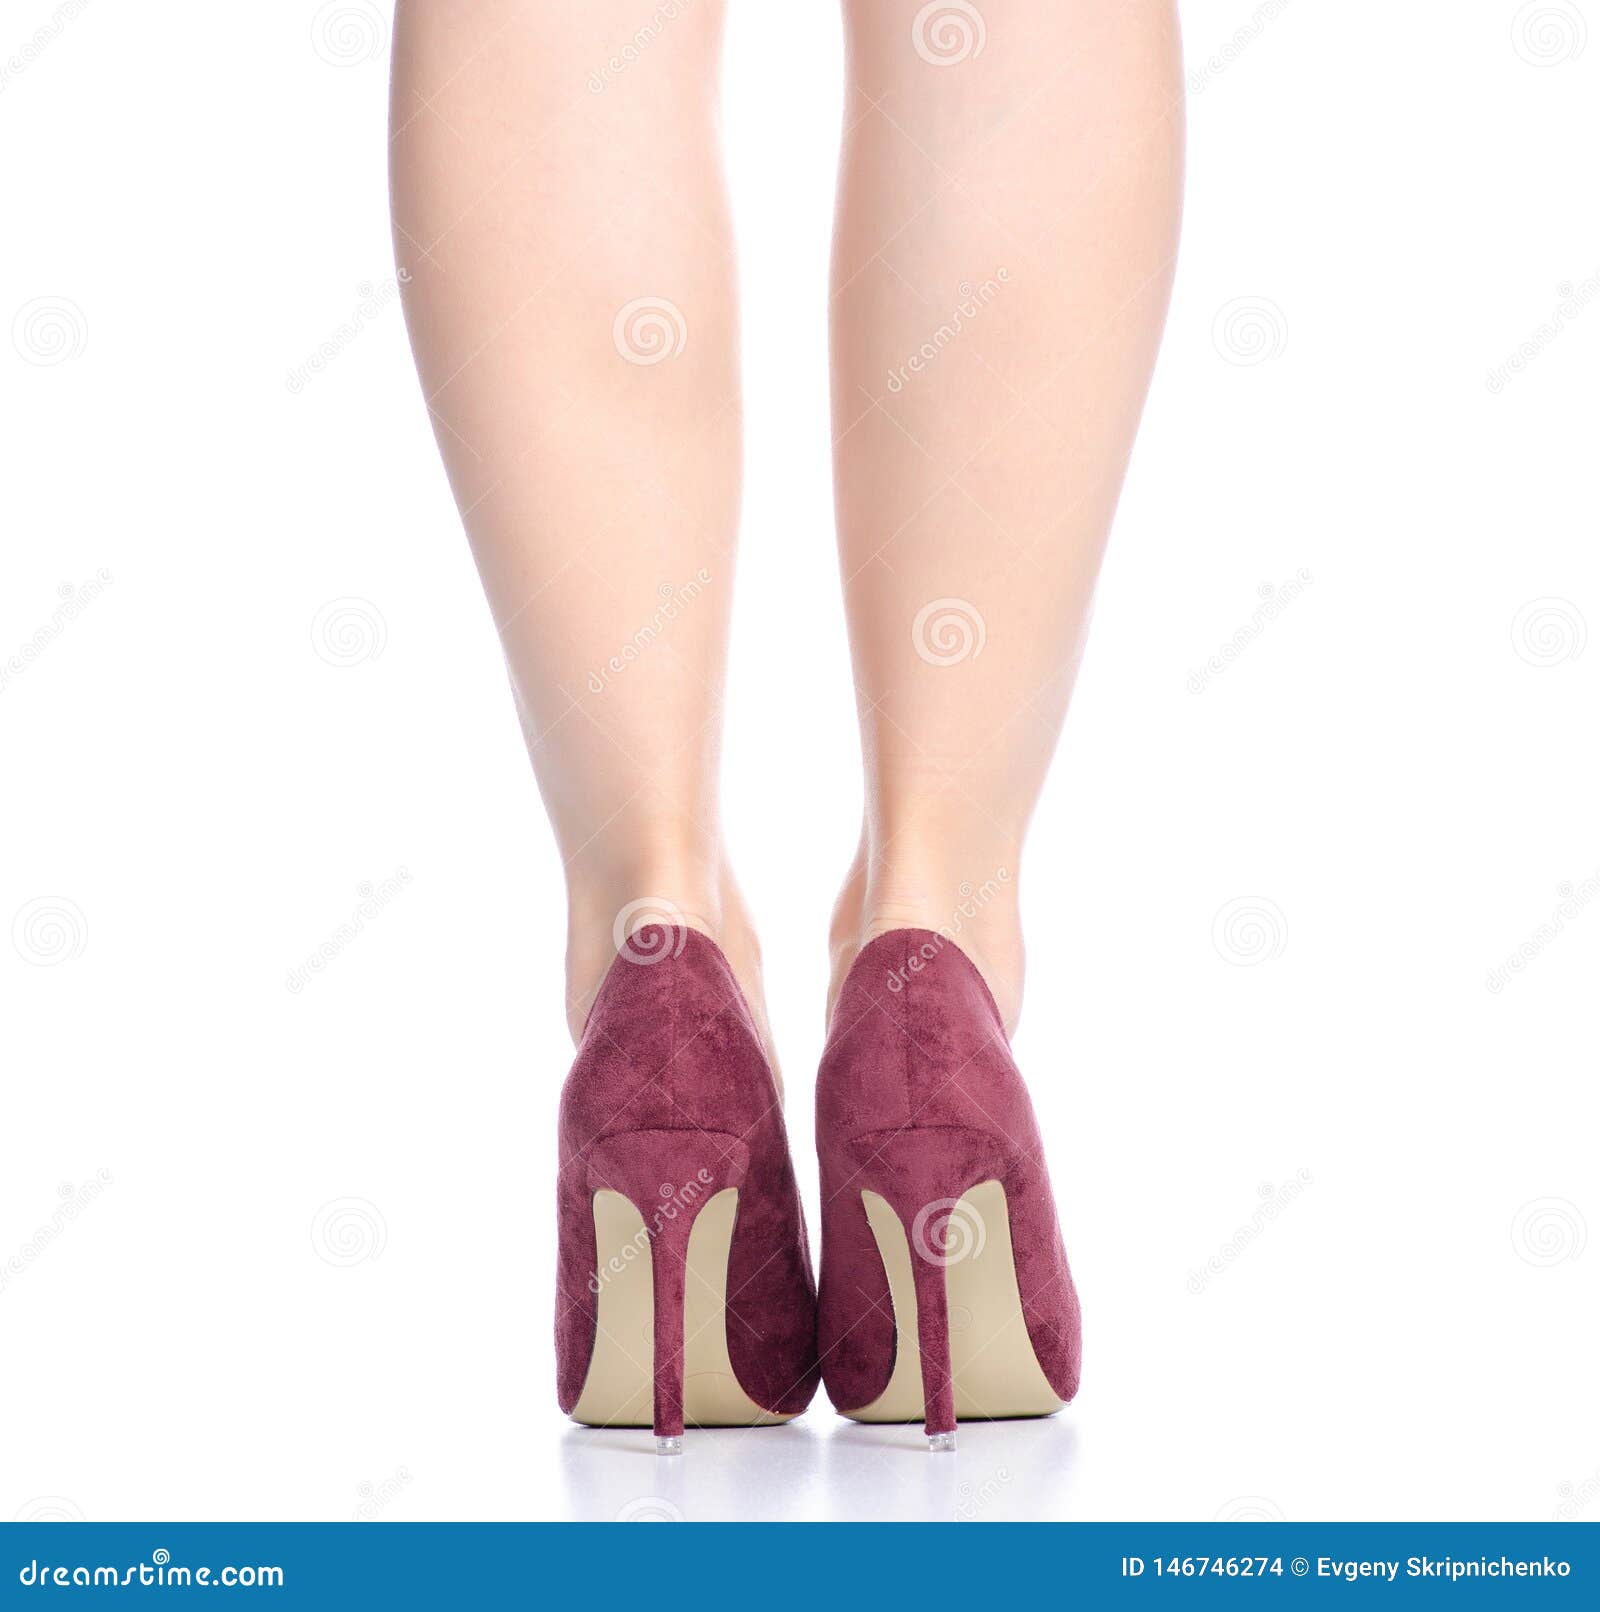 Female Legs With Red High Heels Shoes Fashion Stock Photo ...